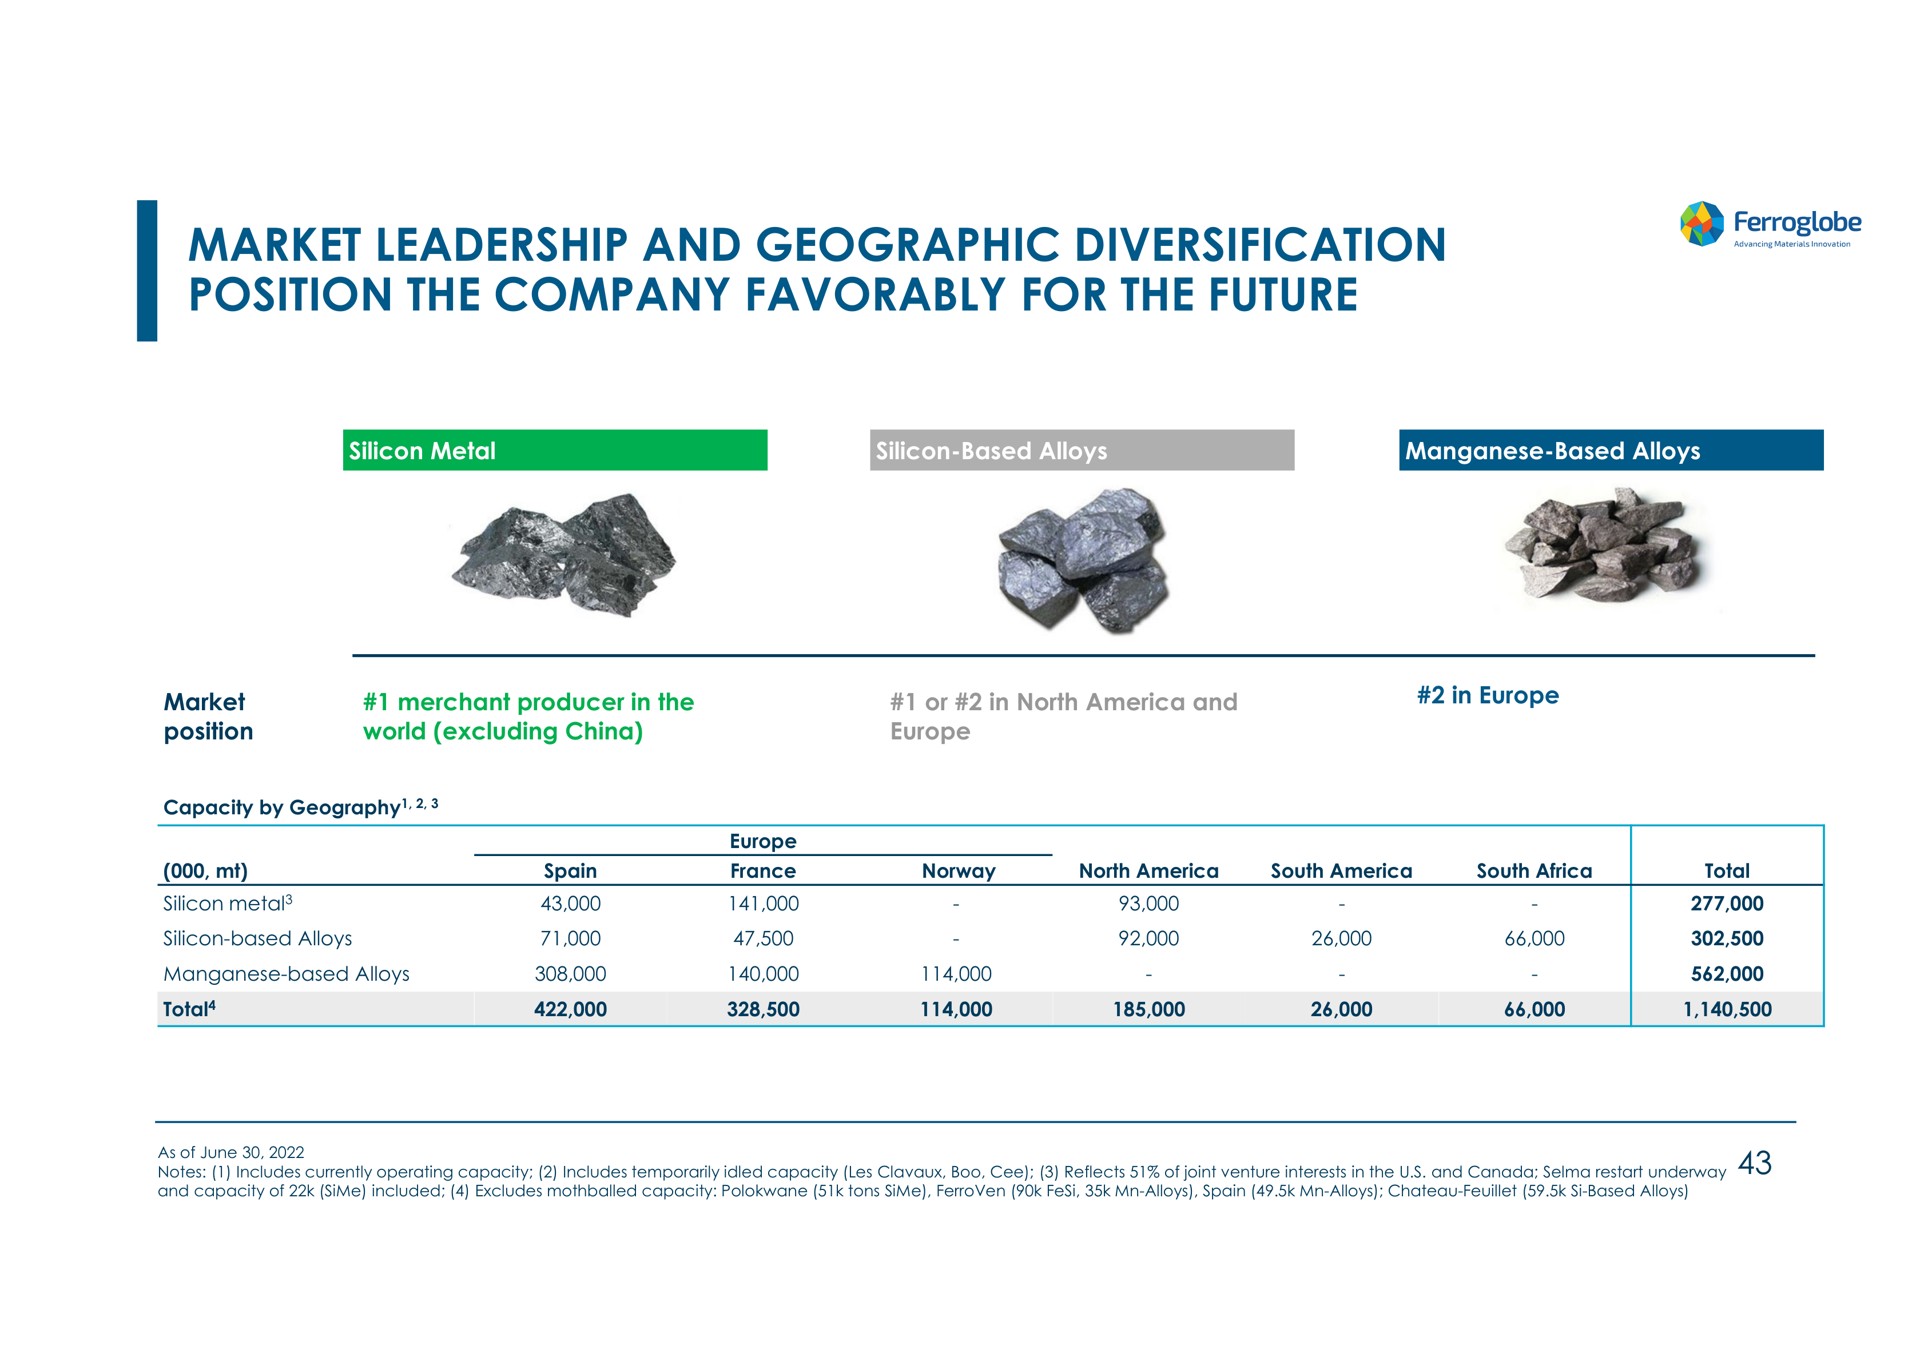 market leadership and geographic diversification position the company favorably for the future | Ferroglobe